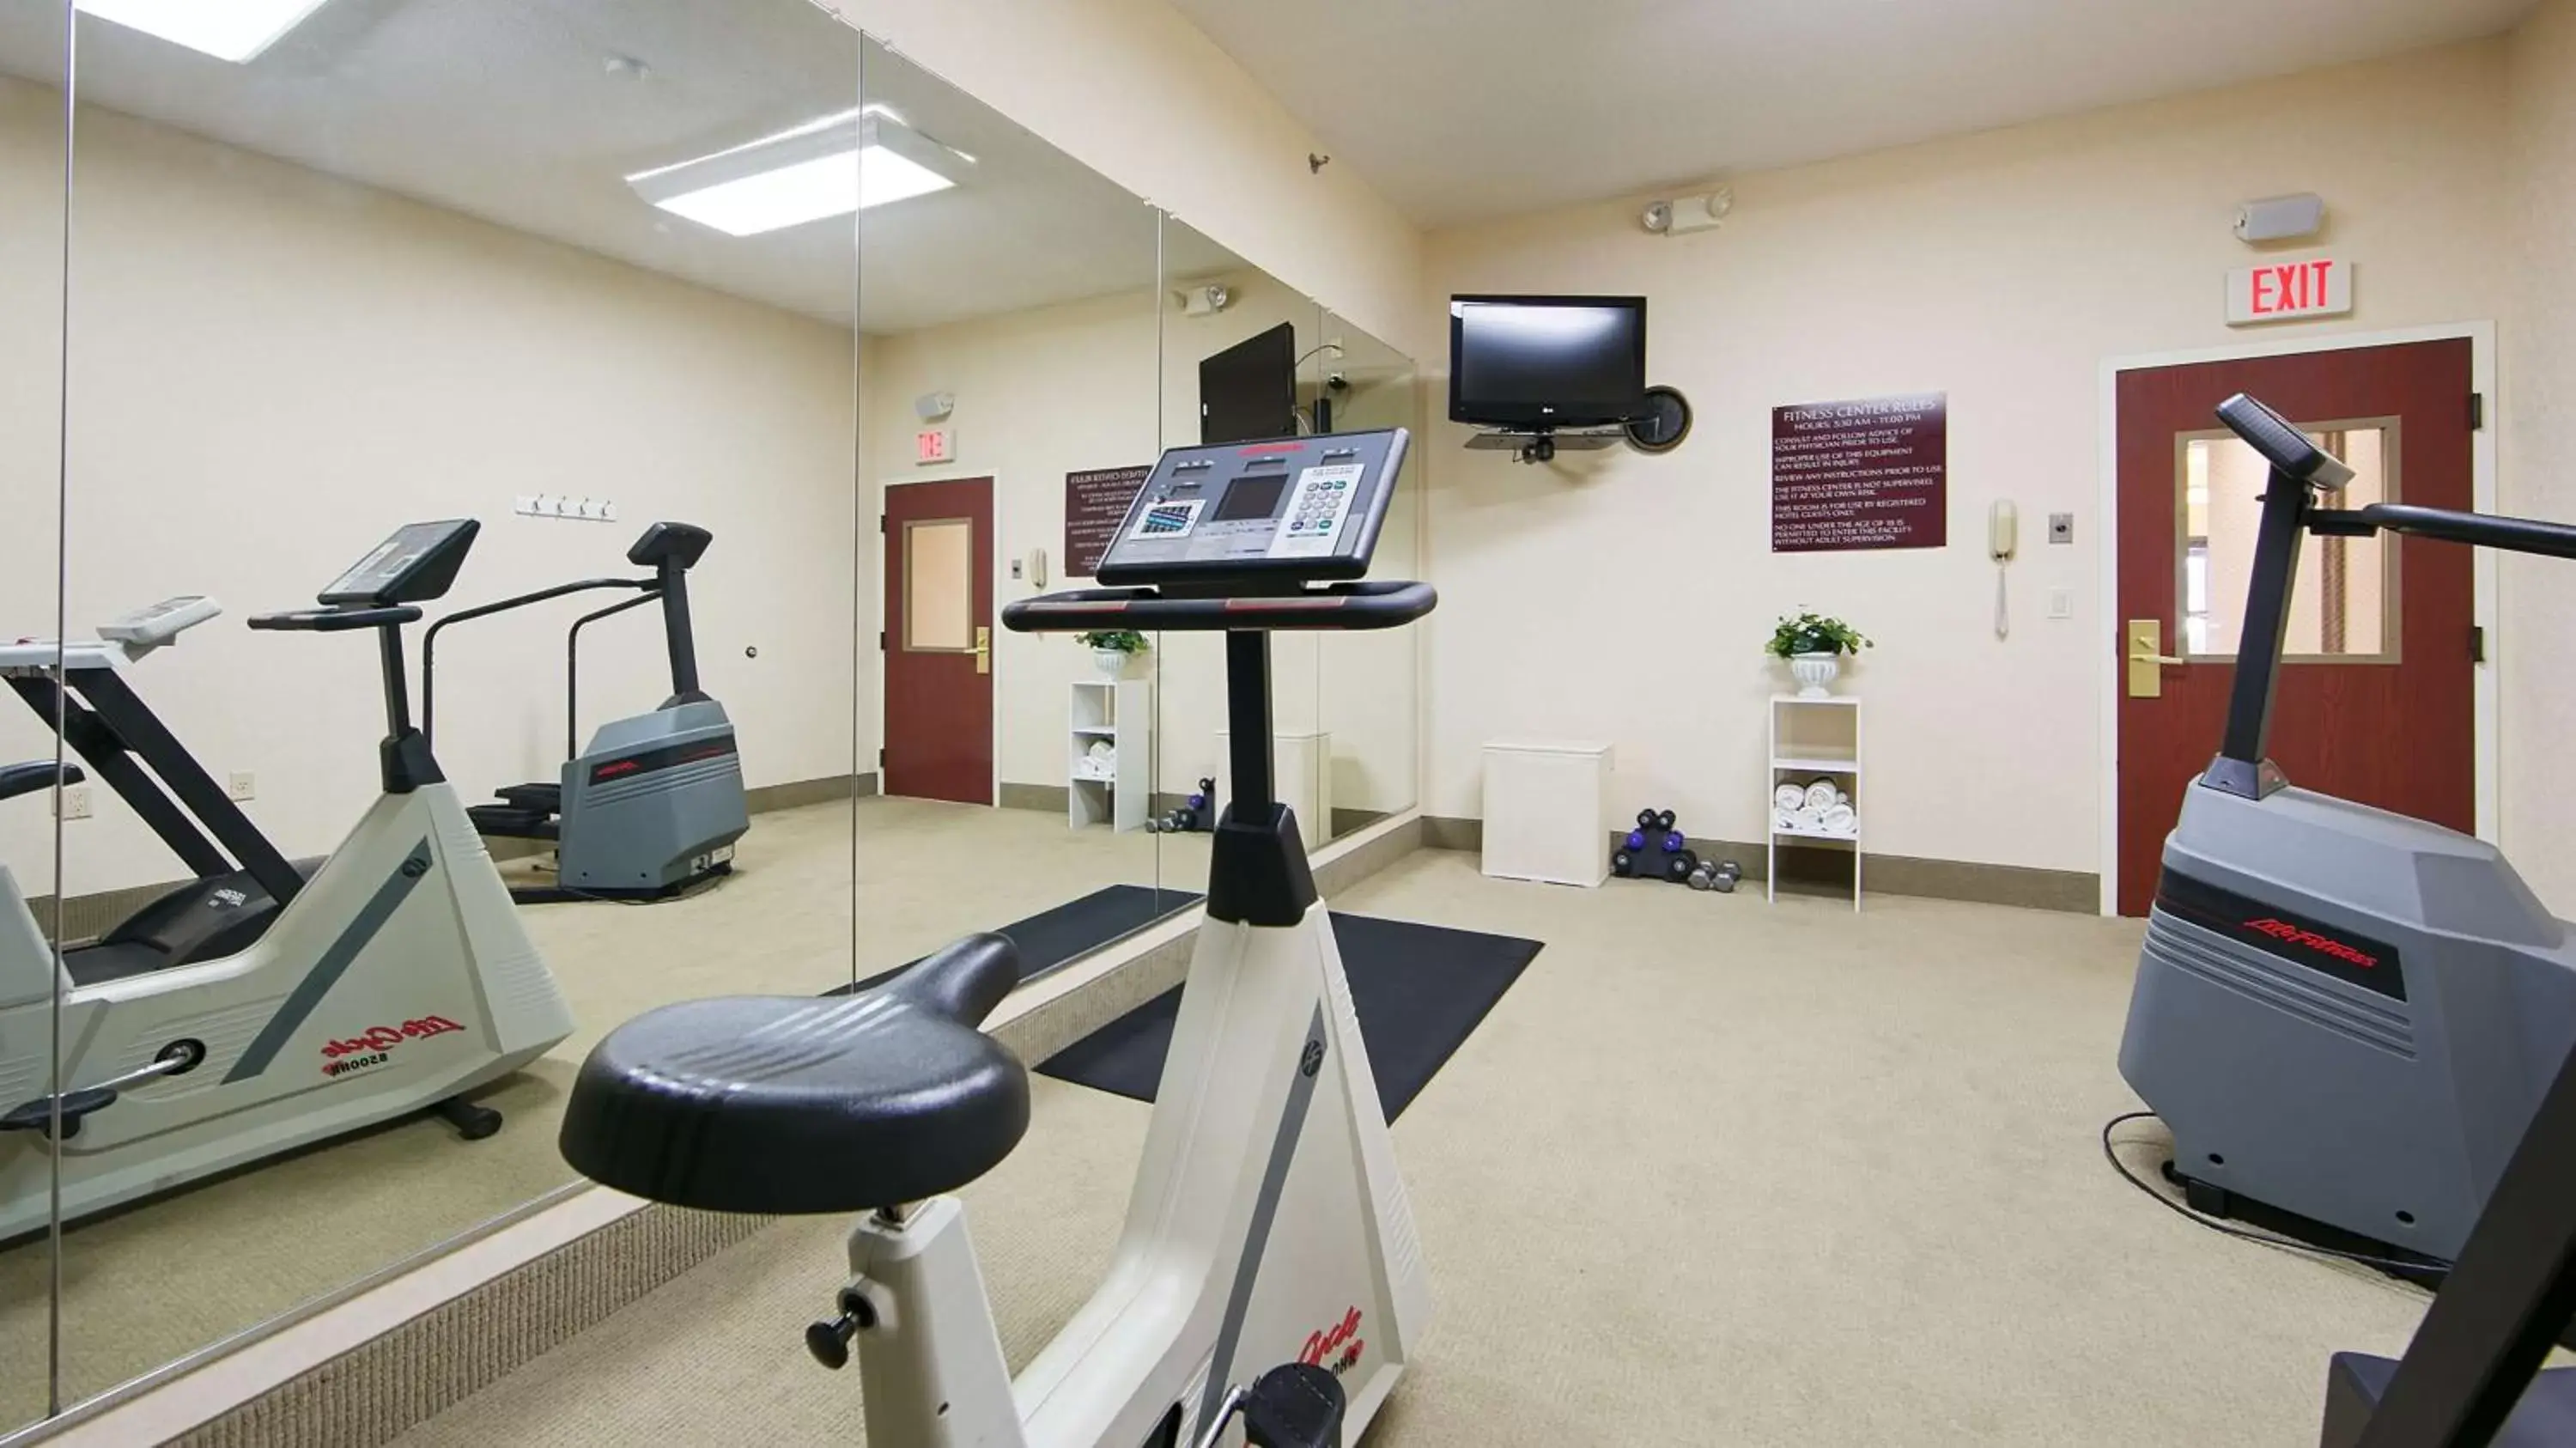 Fitness centre/facilities, Fitness Center/Facilities in Best Western Hiram Inn and Suites